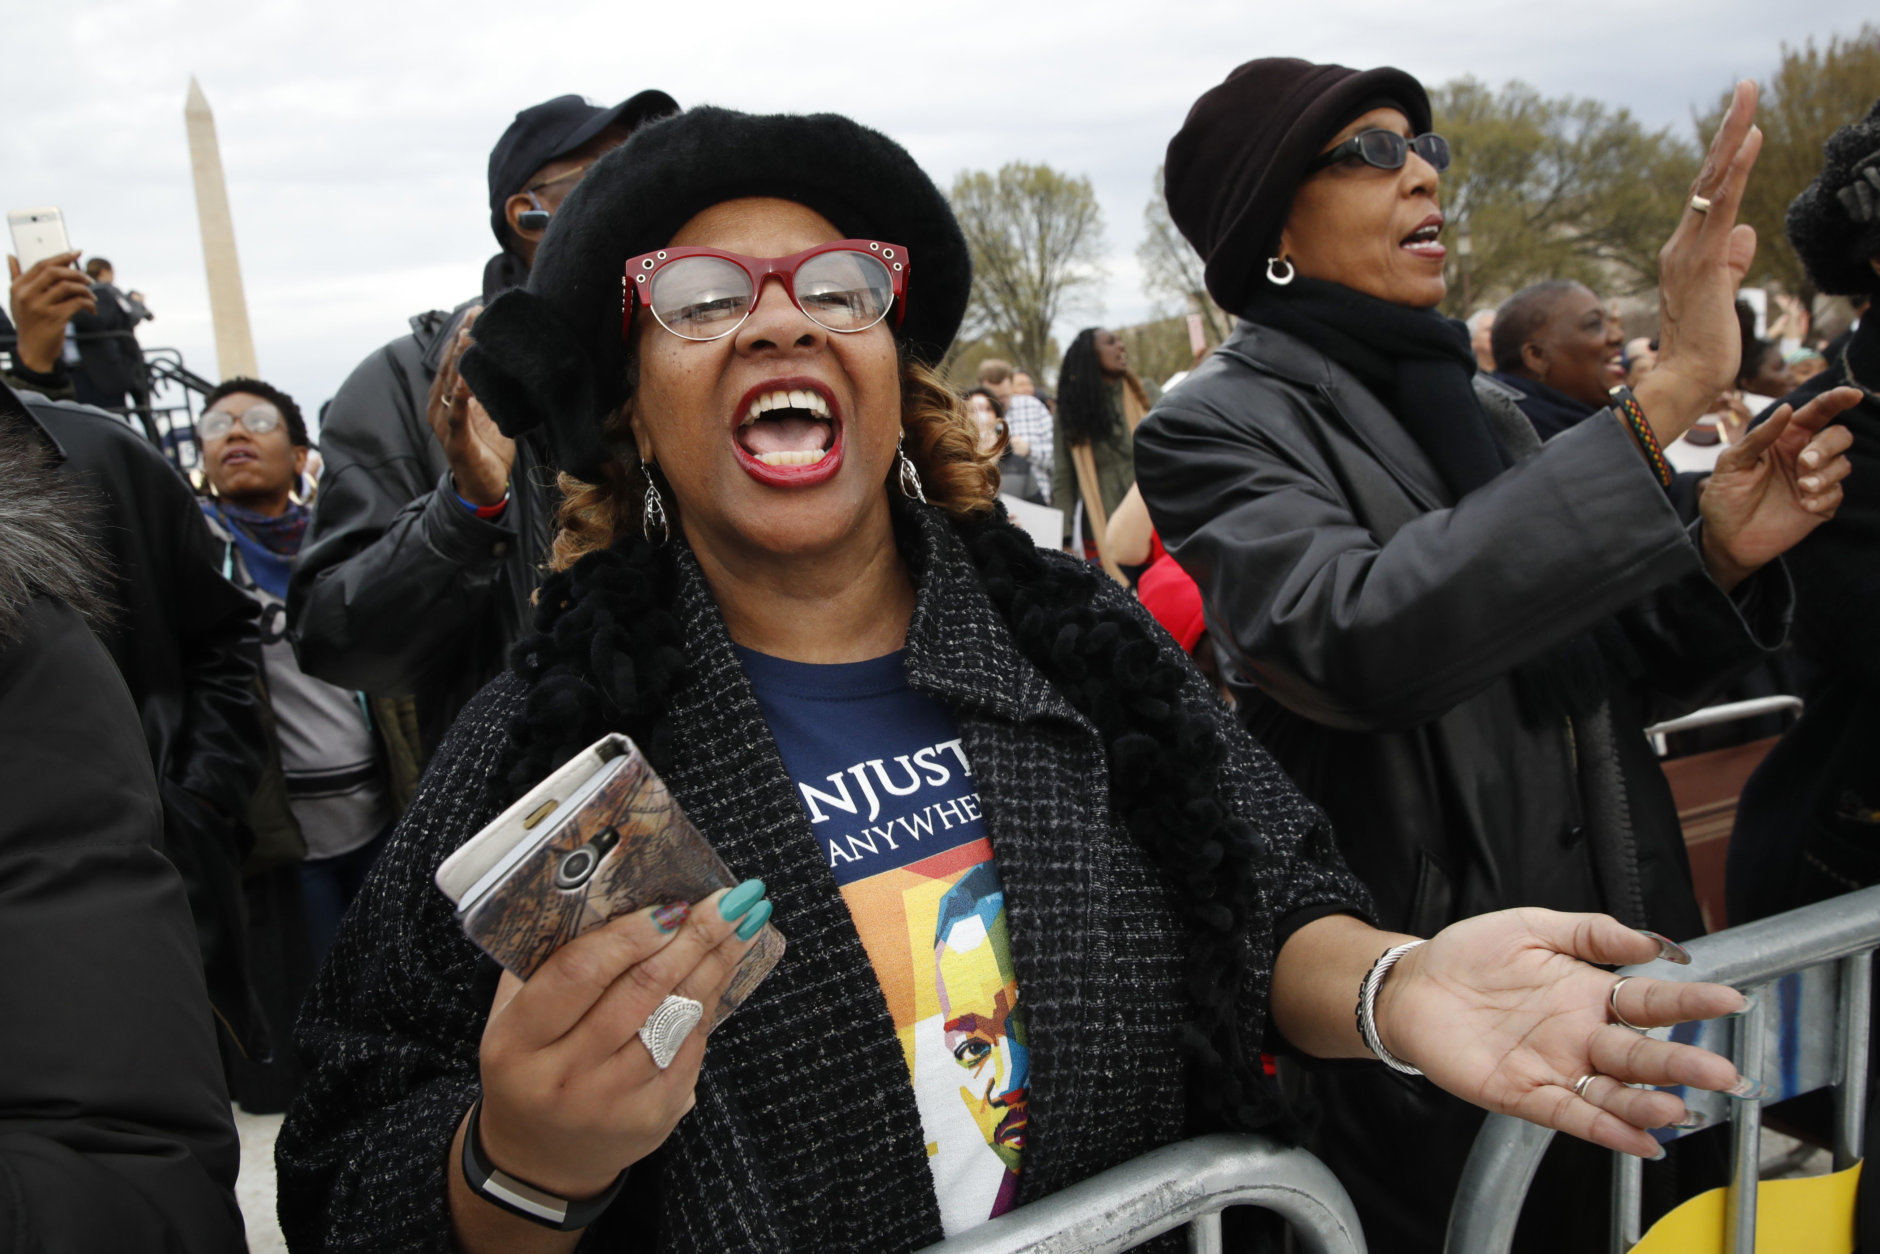 Wearing a t-shirt of Martin Luther King, Jr., Debra Payne, of Kansas City, Missouri, sings "This Little Light of Mine," next to Jo-Lynn Gilliam, of East Point, Ga., as they attend the A.C.T. To End Racism rally, Wednesday, April 4, 2018, on the National Mall in Washington, on the 50th anniversary of Martin Luther King, Jr.'s assassination. (AP Photo/Jacquelyn Martin)